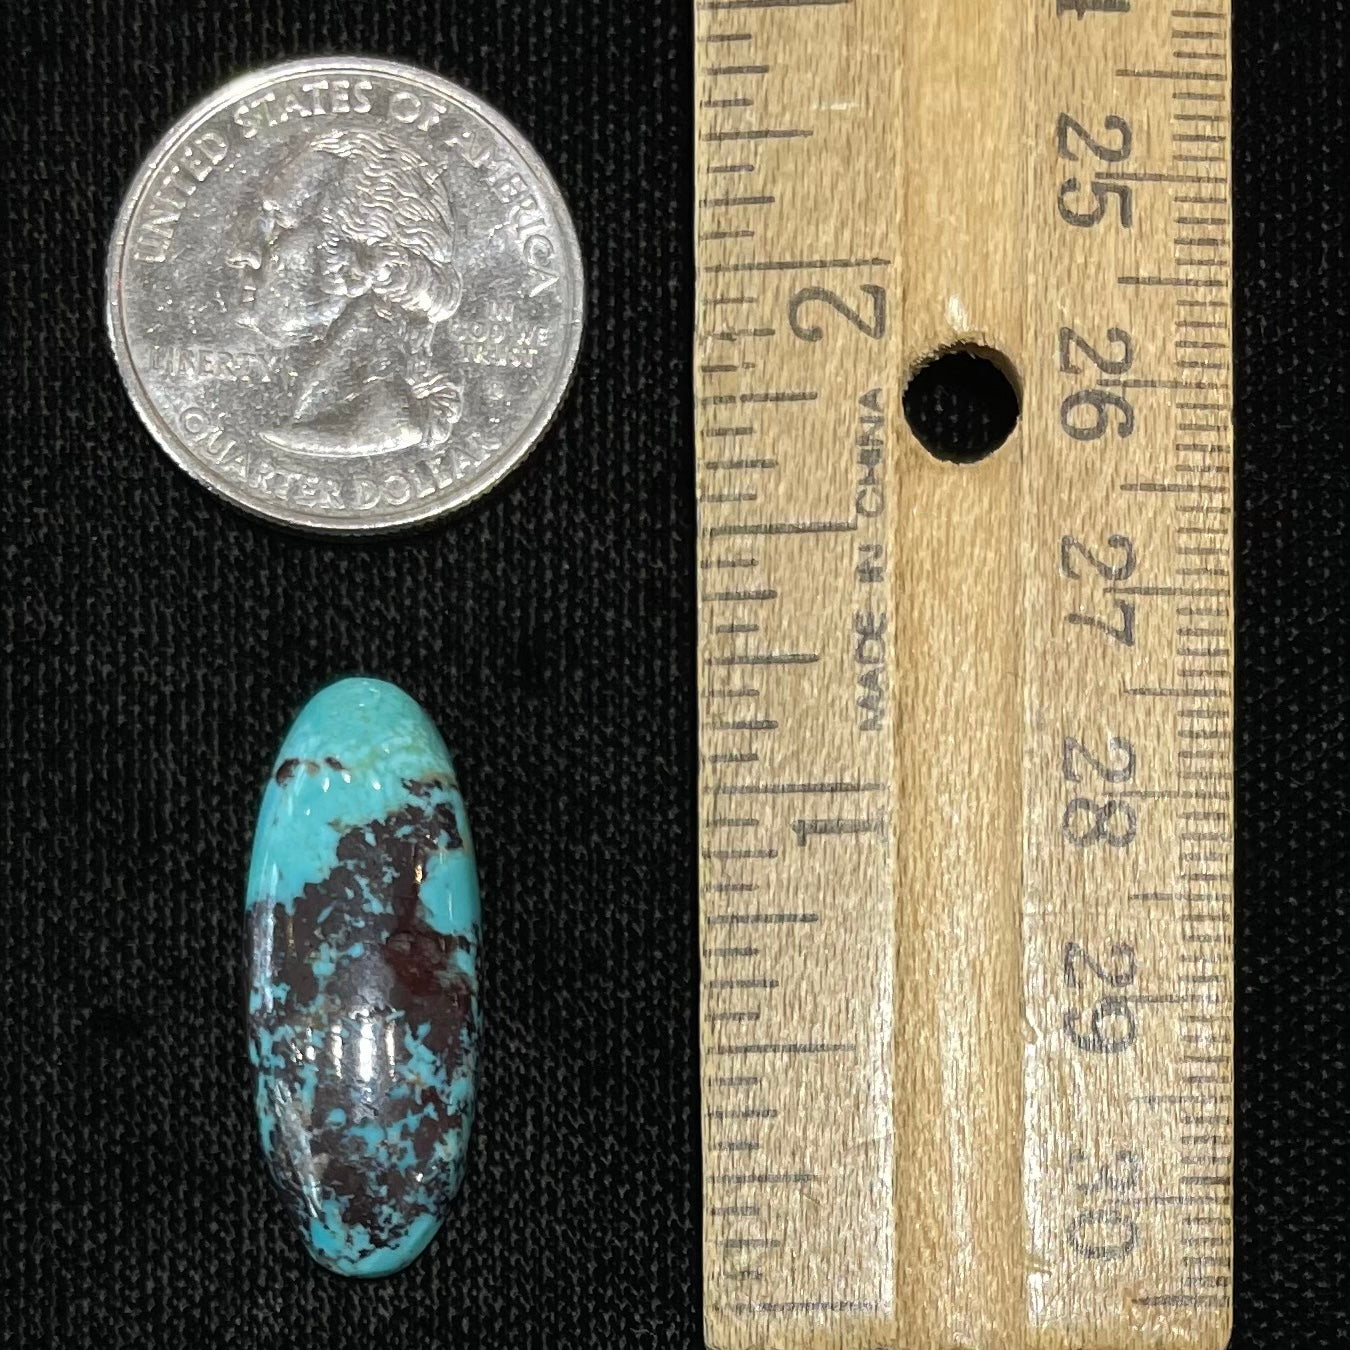 A loose, oval cabochon cut blue and red matrix turquoise stone from Royston District, Nevada.